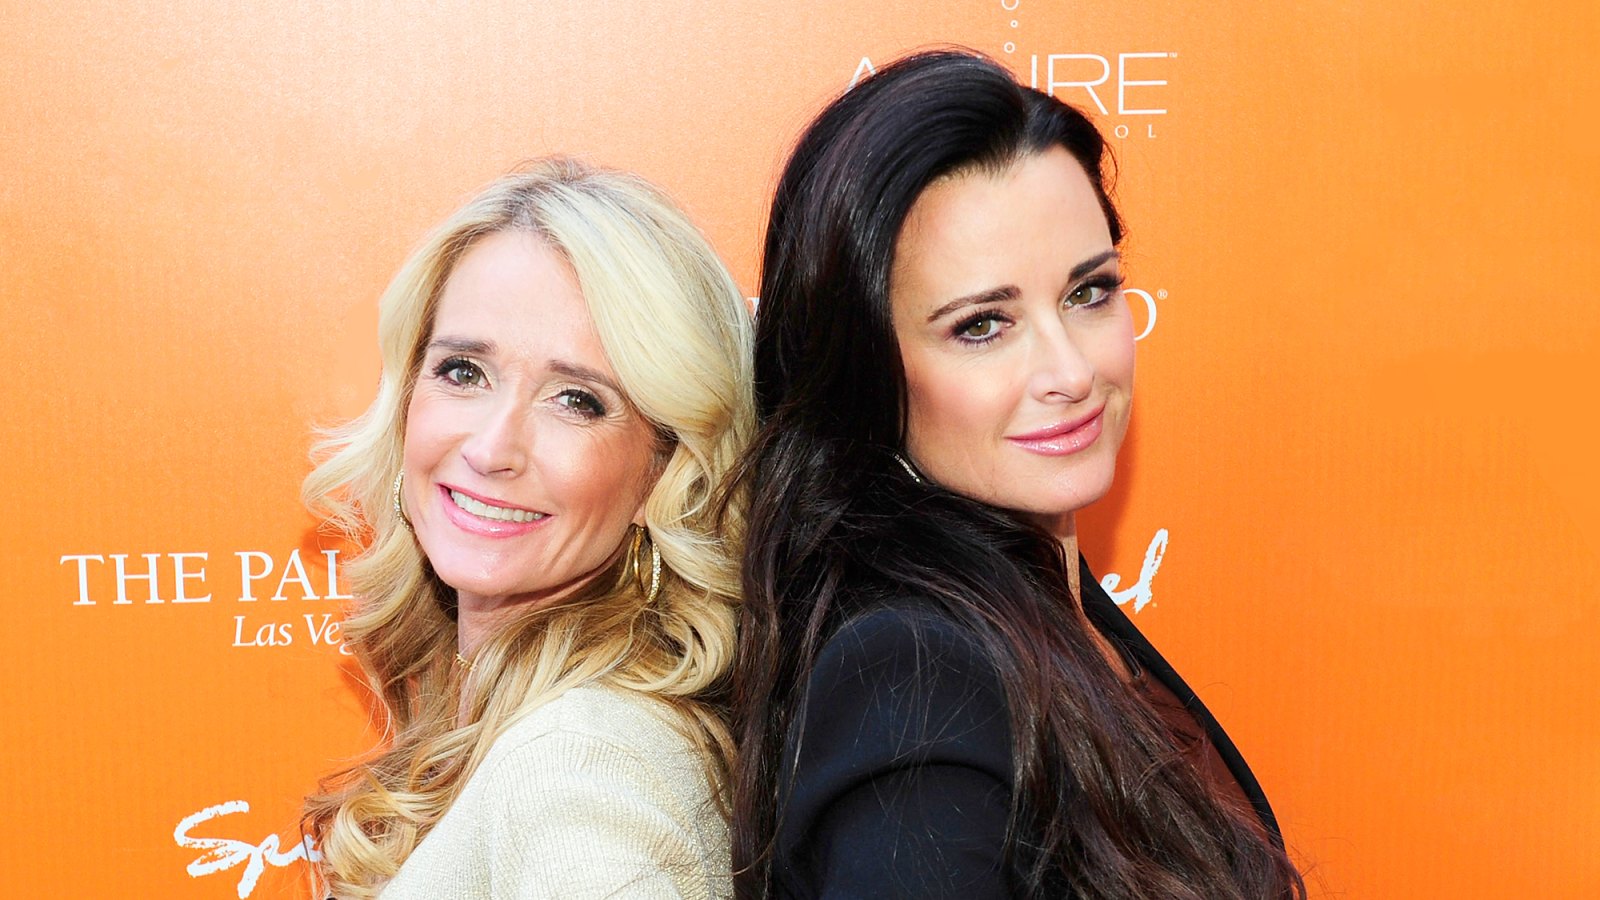 Kim Richards and Kyle Richards arrive to the grand opening of Azure luxury pool at The Palazzo on April 10, 2011 in Las Vegas, Nevada.